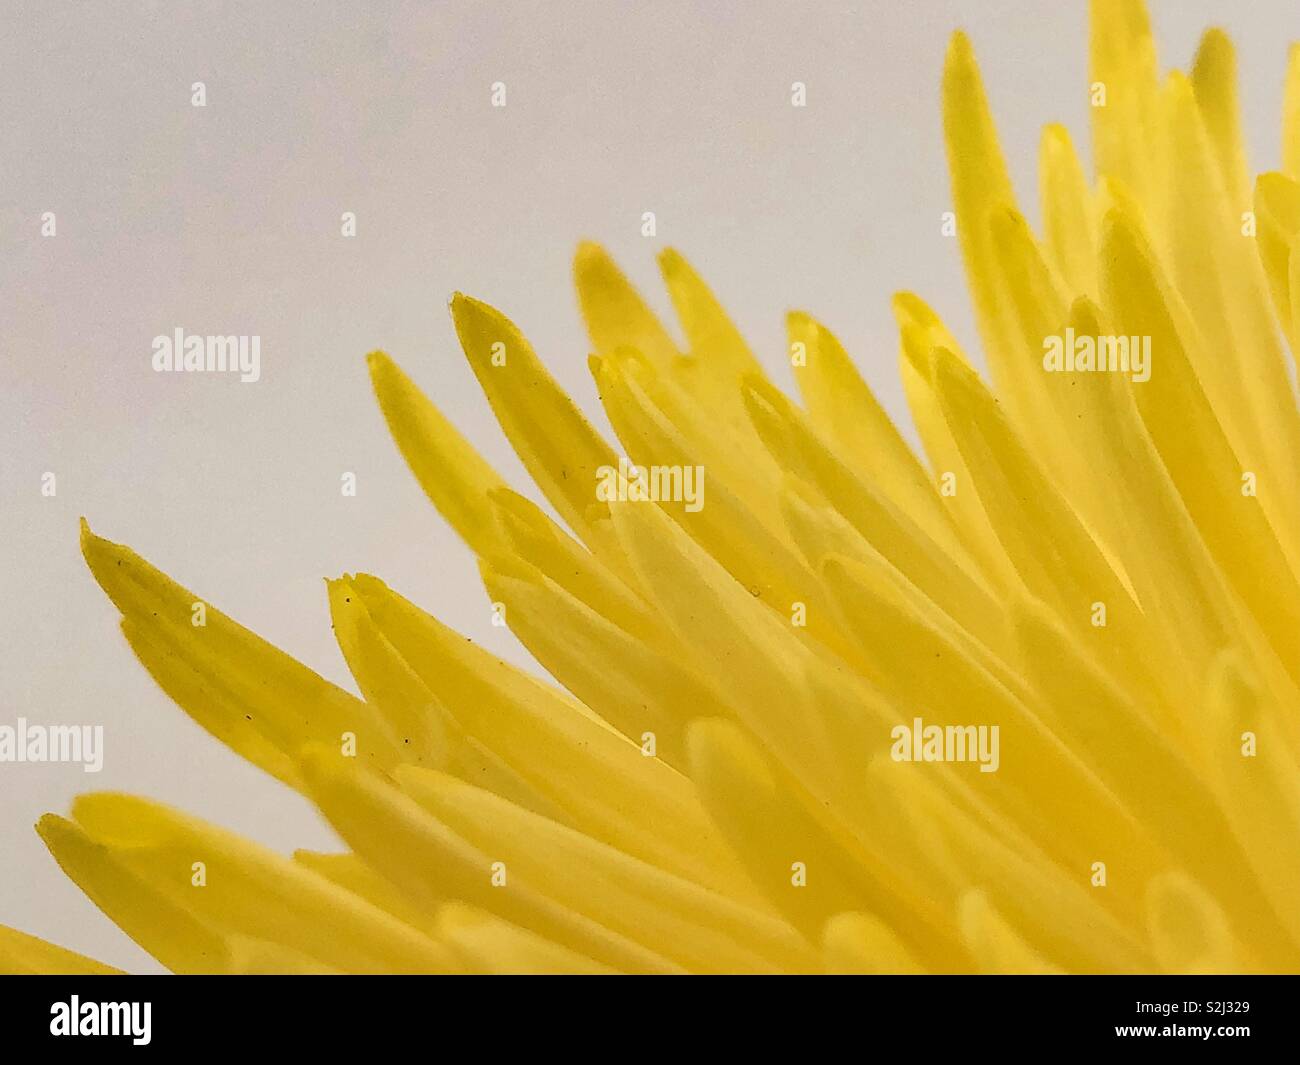 Corner view of yellow petals from the edge of a chrysanthemum. Stock Photo